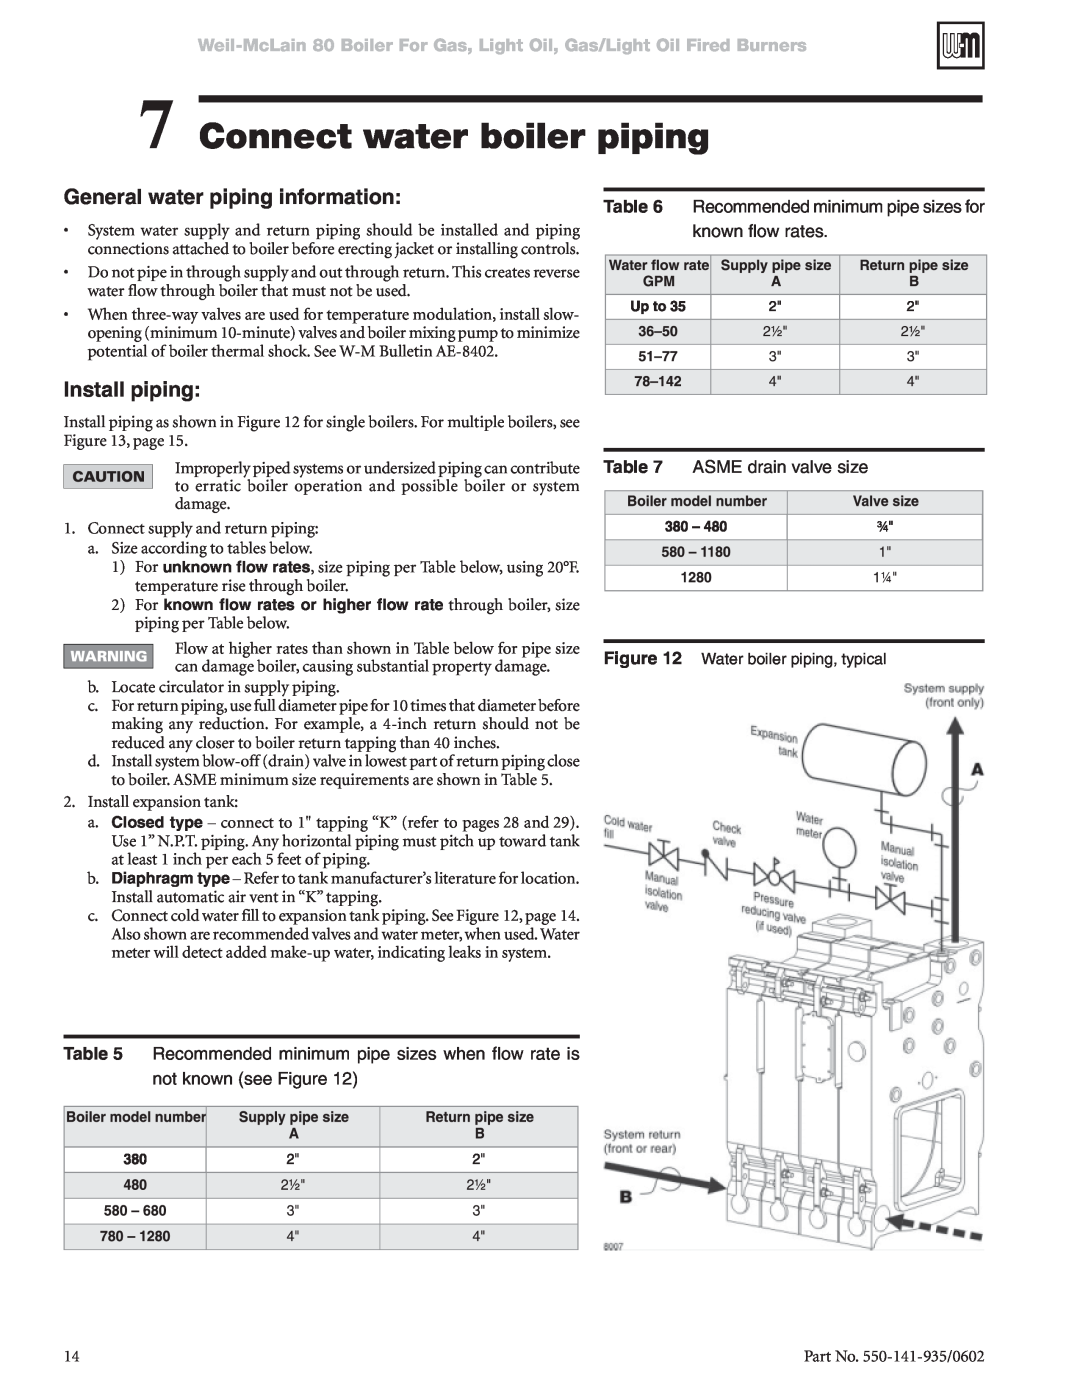 Weil-McLain 80 manual Connect water boiler piping, General water piping information, Install piping, known flow rates 